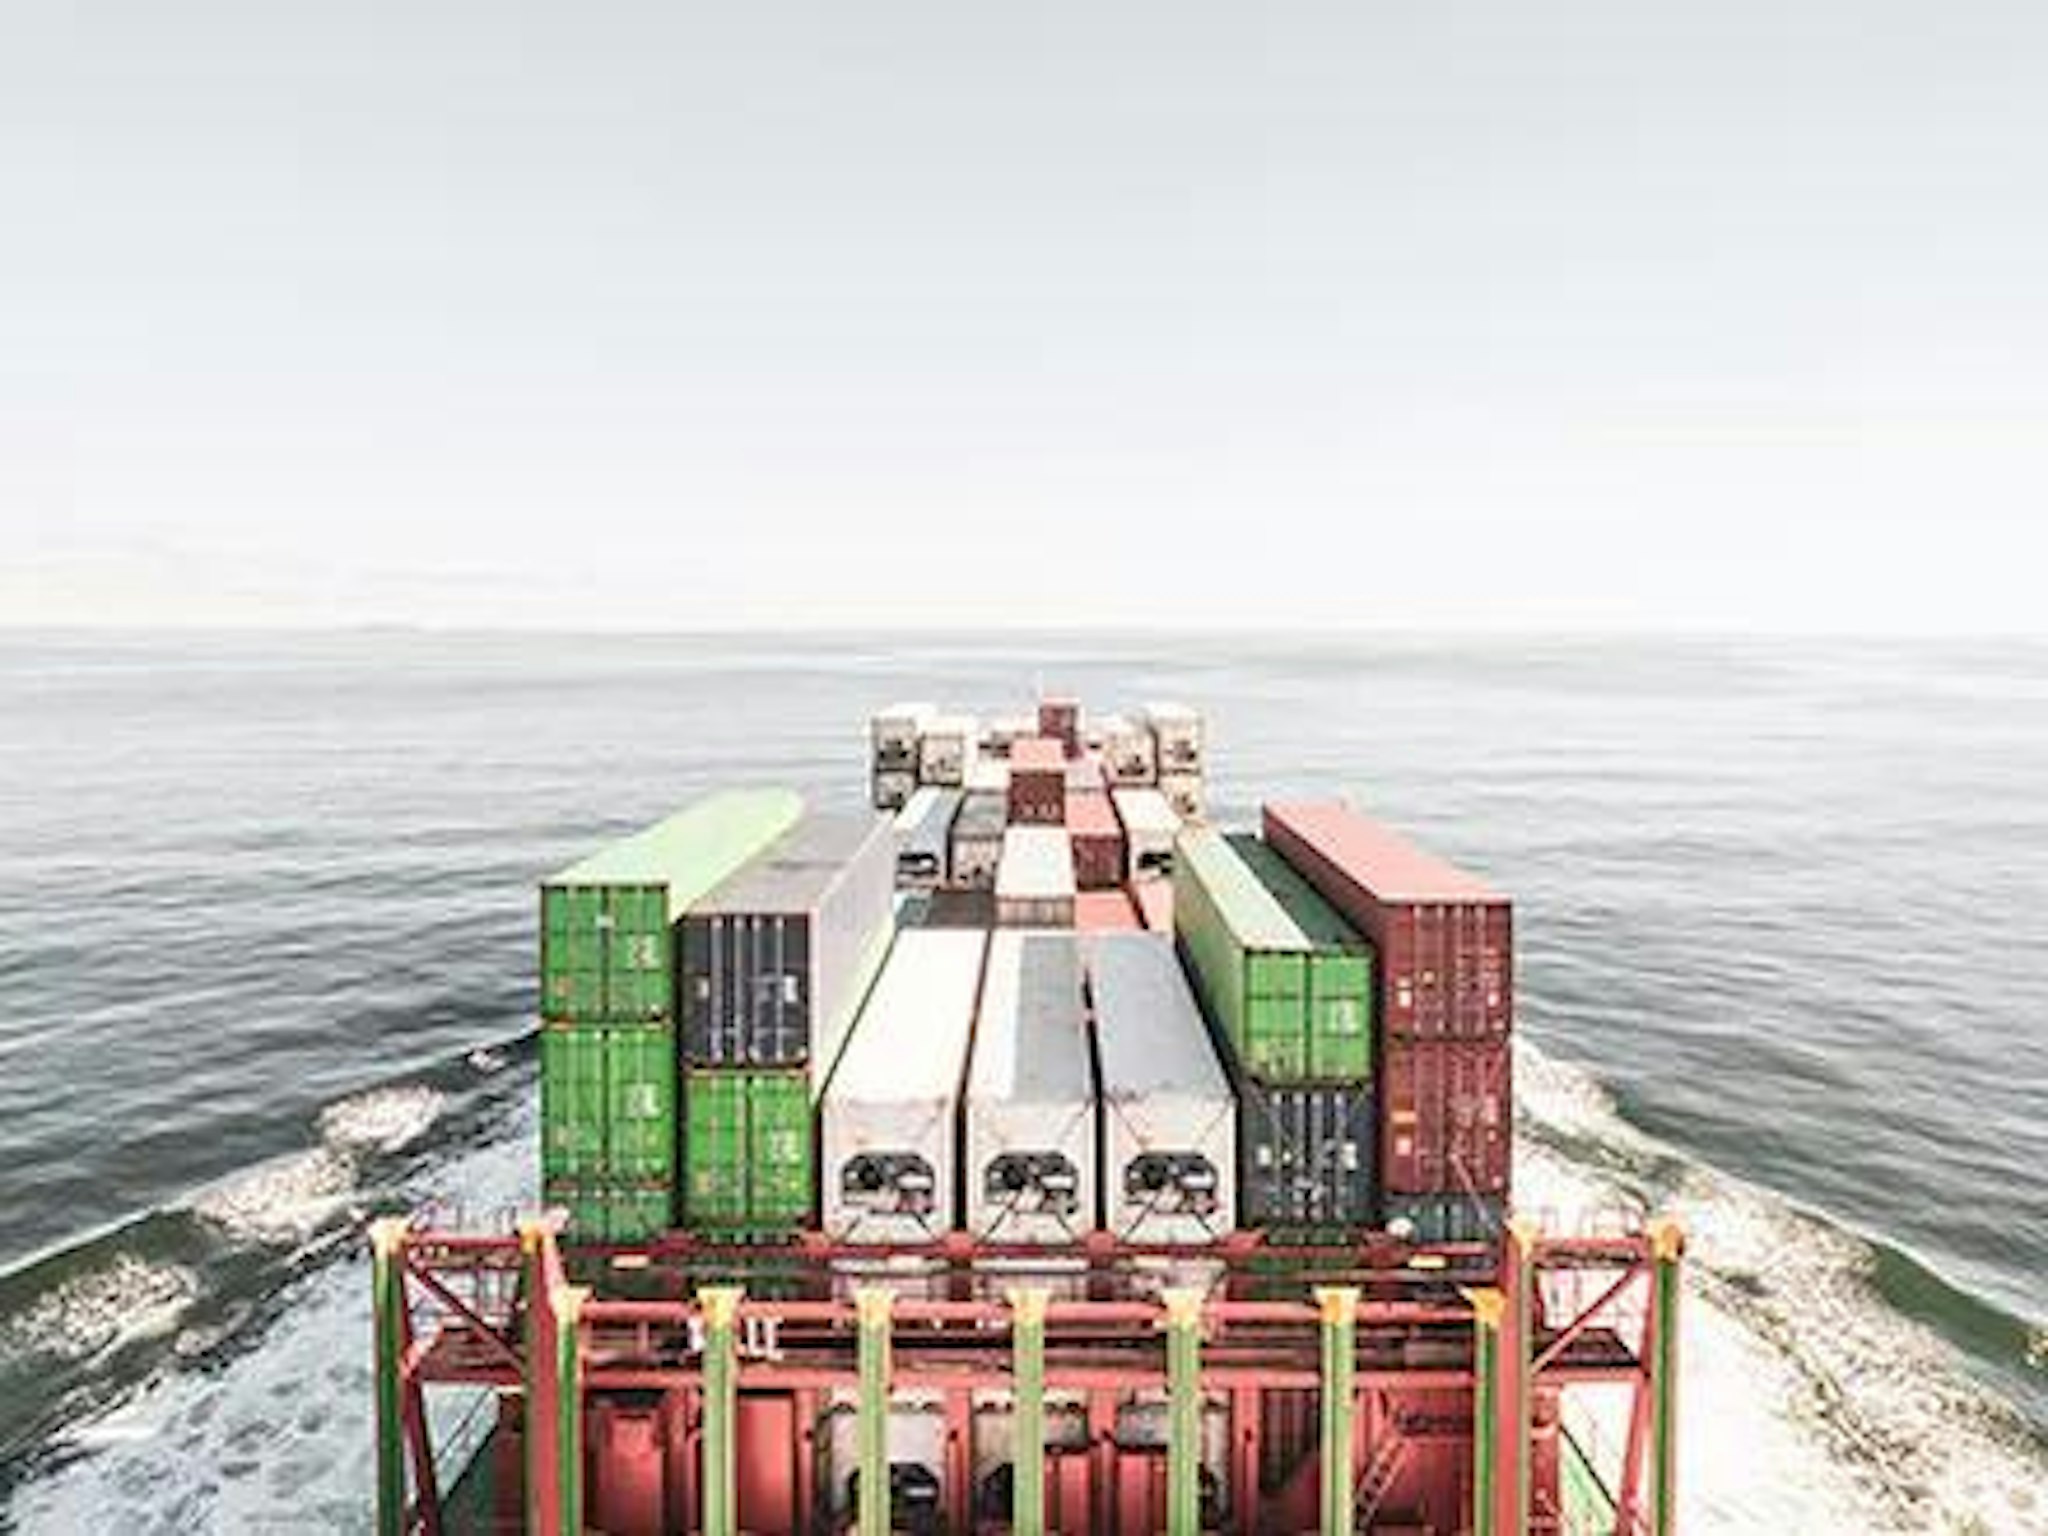 Image of crates on a ship representing business carbon offsetting